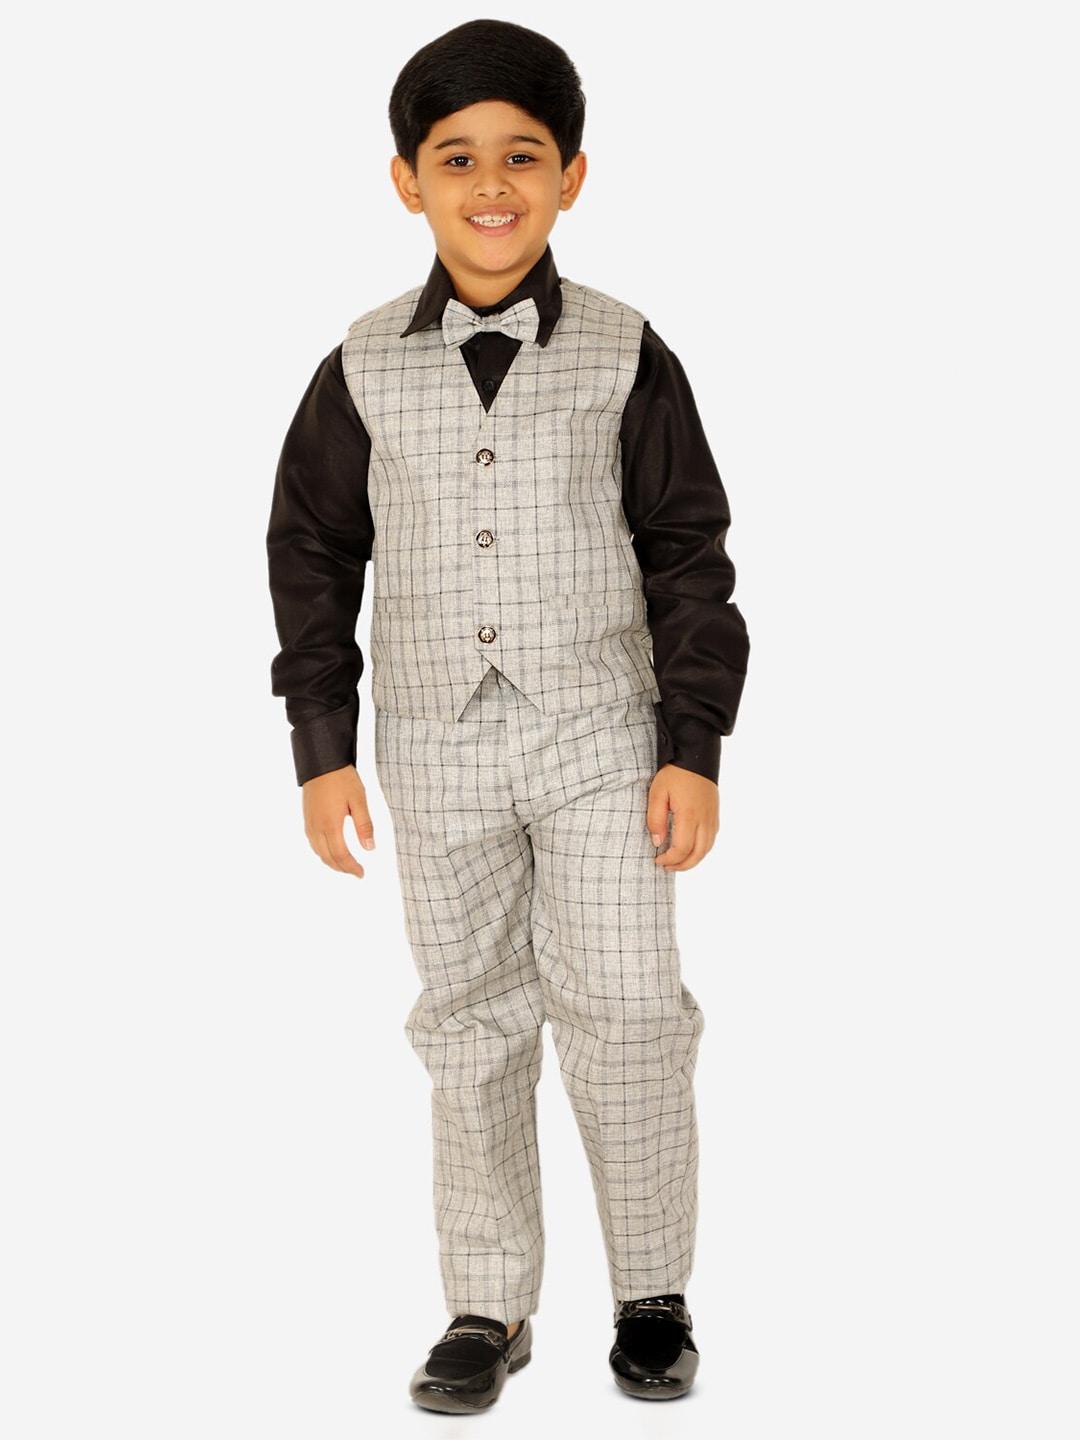 pro-ethic style developer boys checked pure cotton shirt & trousers with waistcoat & bow